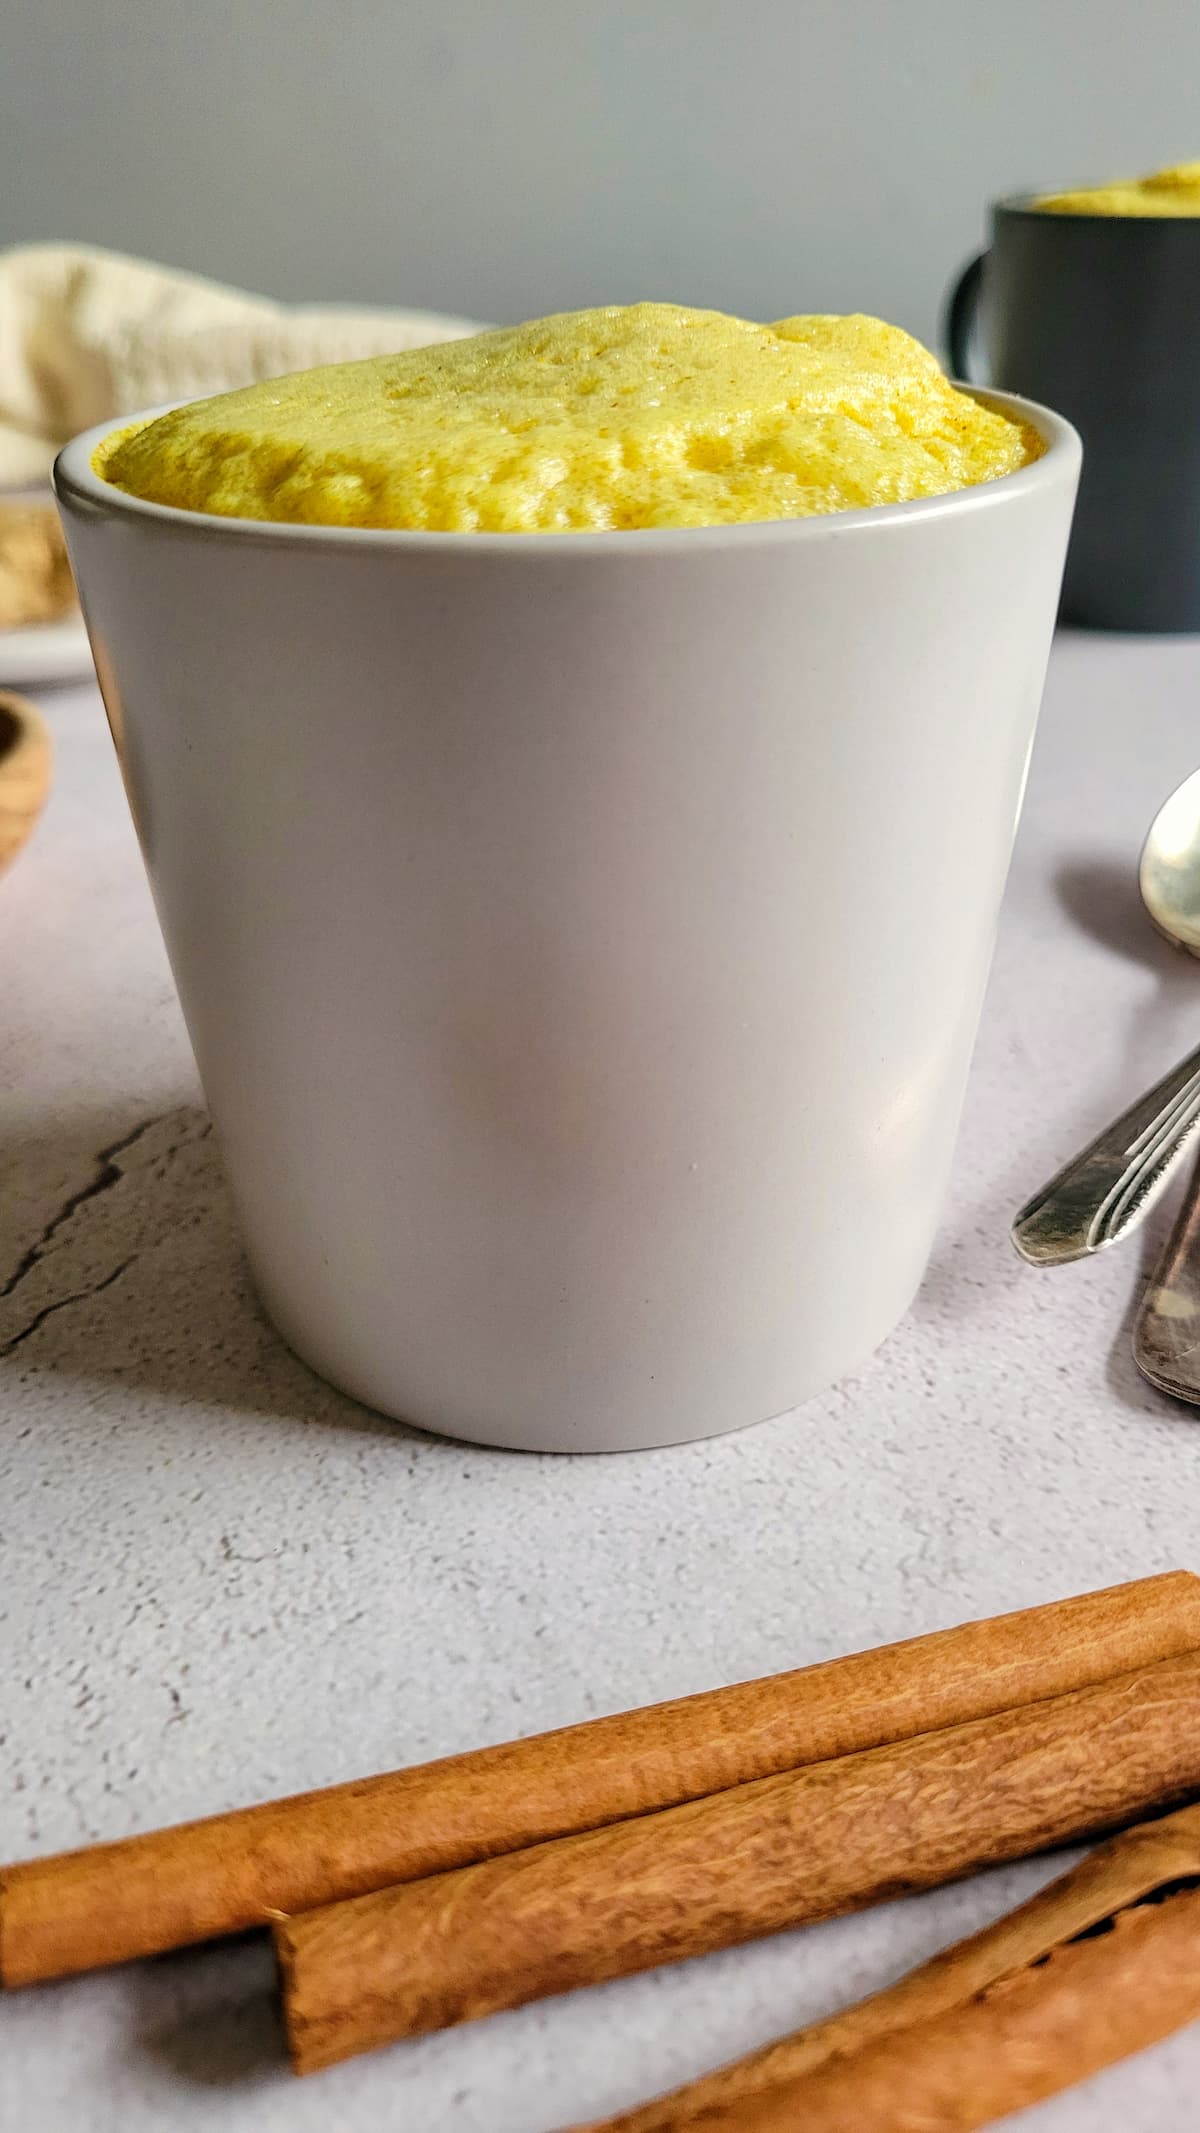 mug with yellow foam, cinnamon sticks in the front, another mug in the background